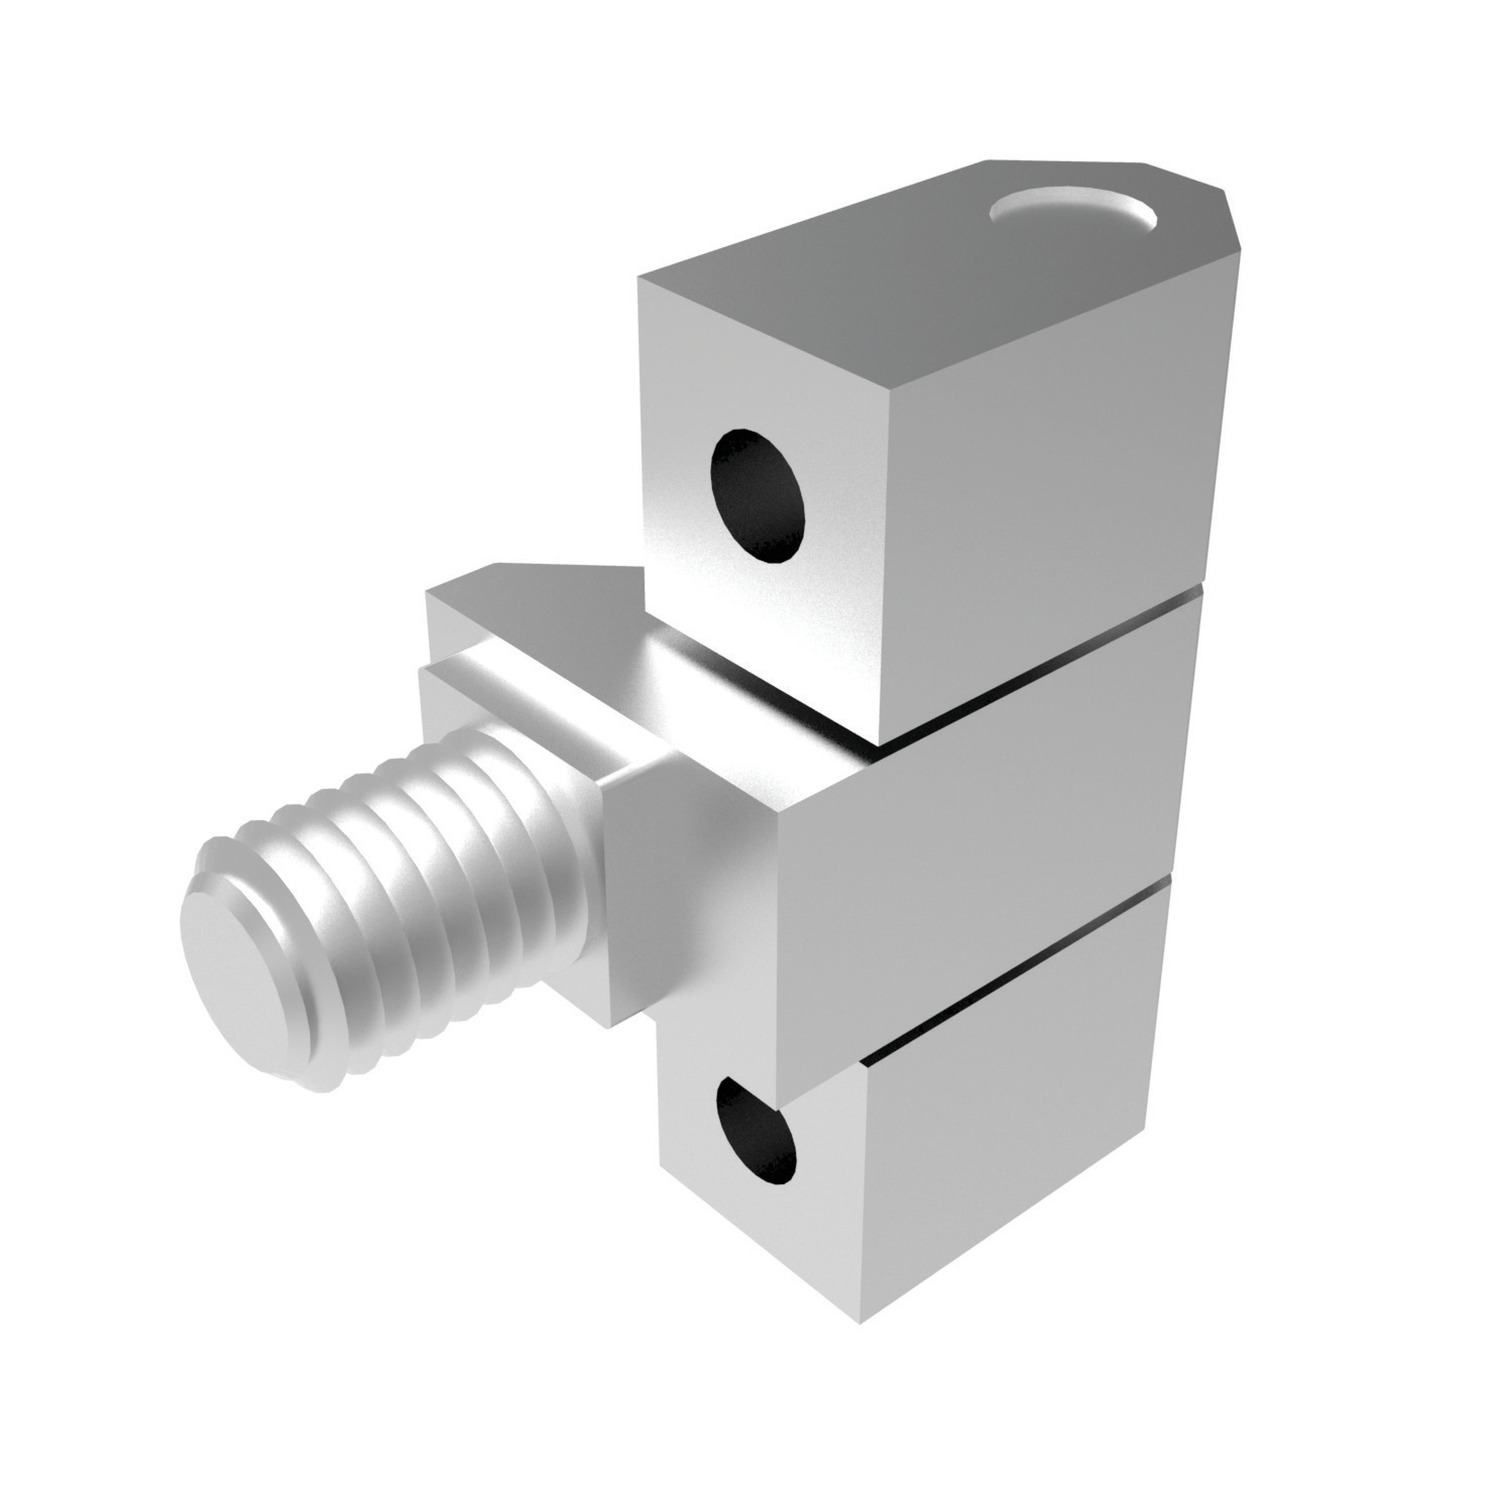 S1172.AW0010 Surface Mount Hinge intergrated stud & screw mount